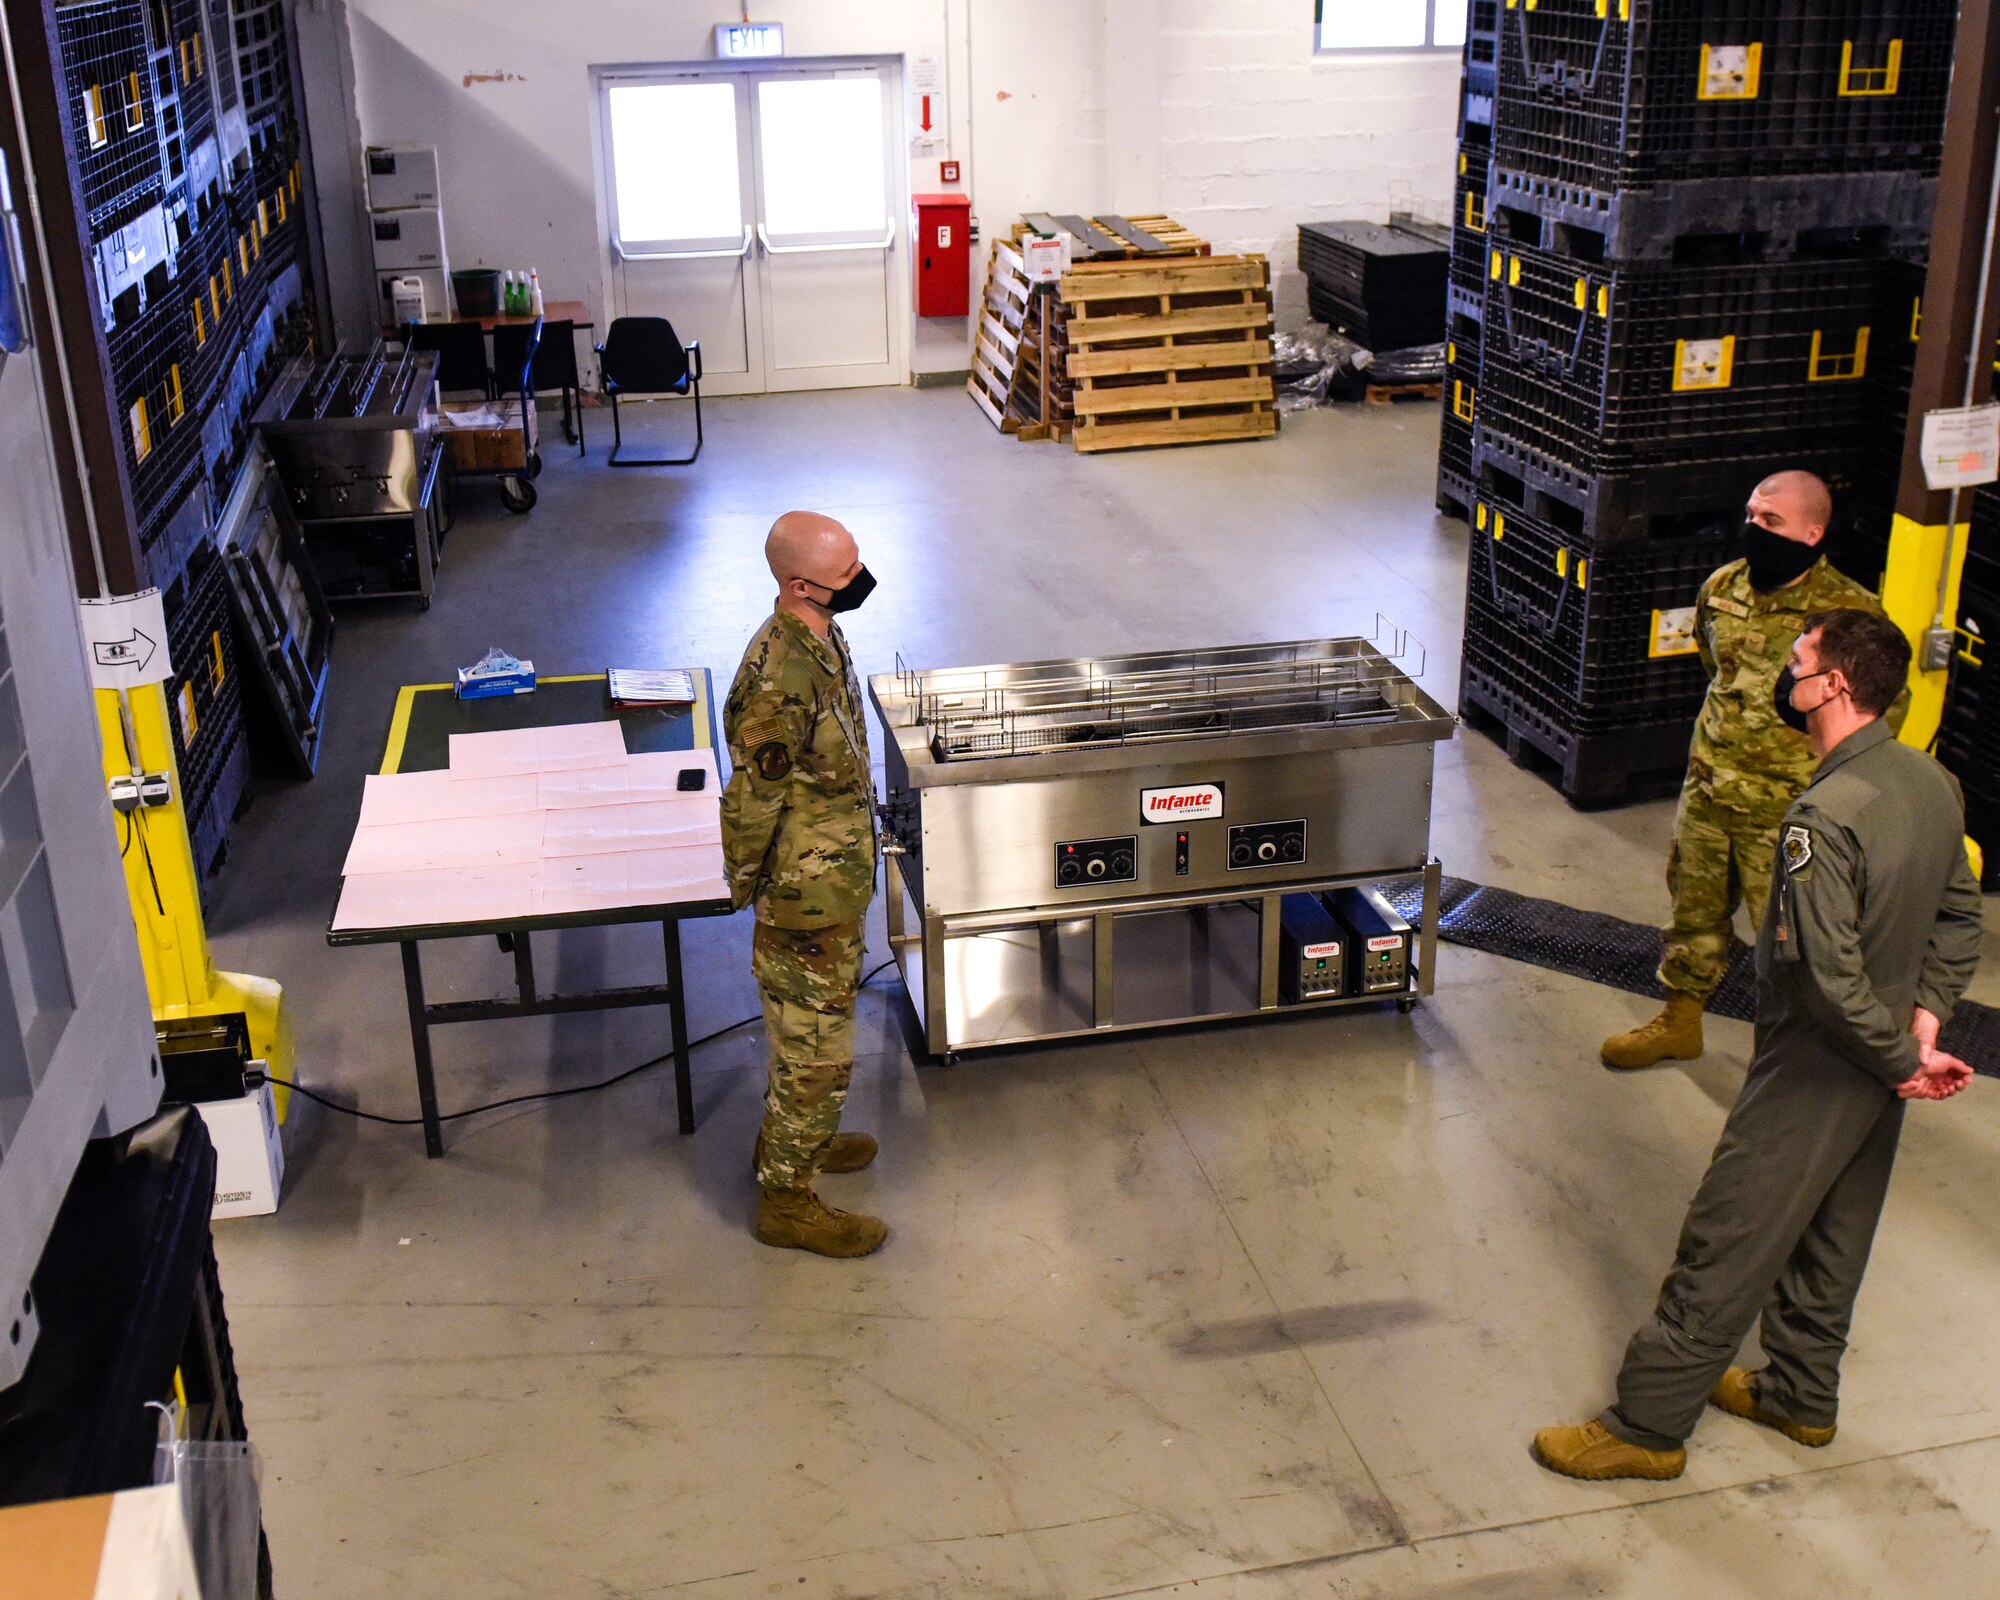 Two members of the 52nd Logistics Readiness Squadron greet U.S. Air Force Col. David C. Epperson, 52nd Fighter Wing commander, bottom right, before showing him a new ultrasonic weapons cleaner at Spangdahlem Air Base, Germany, Nov. 9, 2020. The machine allows for a two-member team to get 60 M4s inspection-ready on one typical workday shift. (U.S. Air Force photo by Senior Airman Chanceler Nardone)